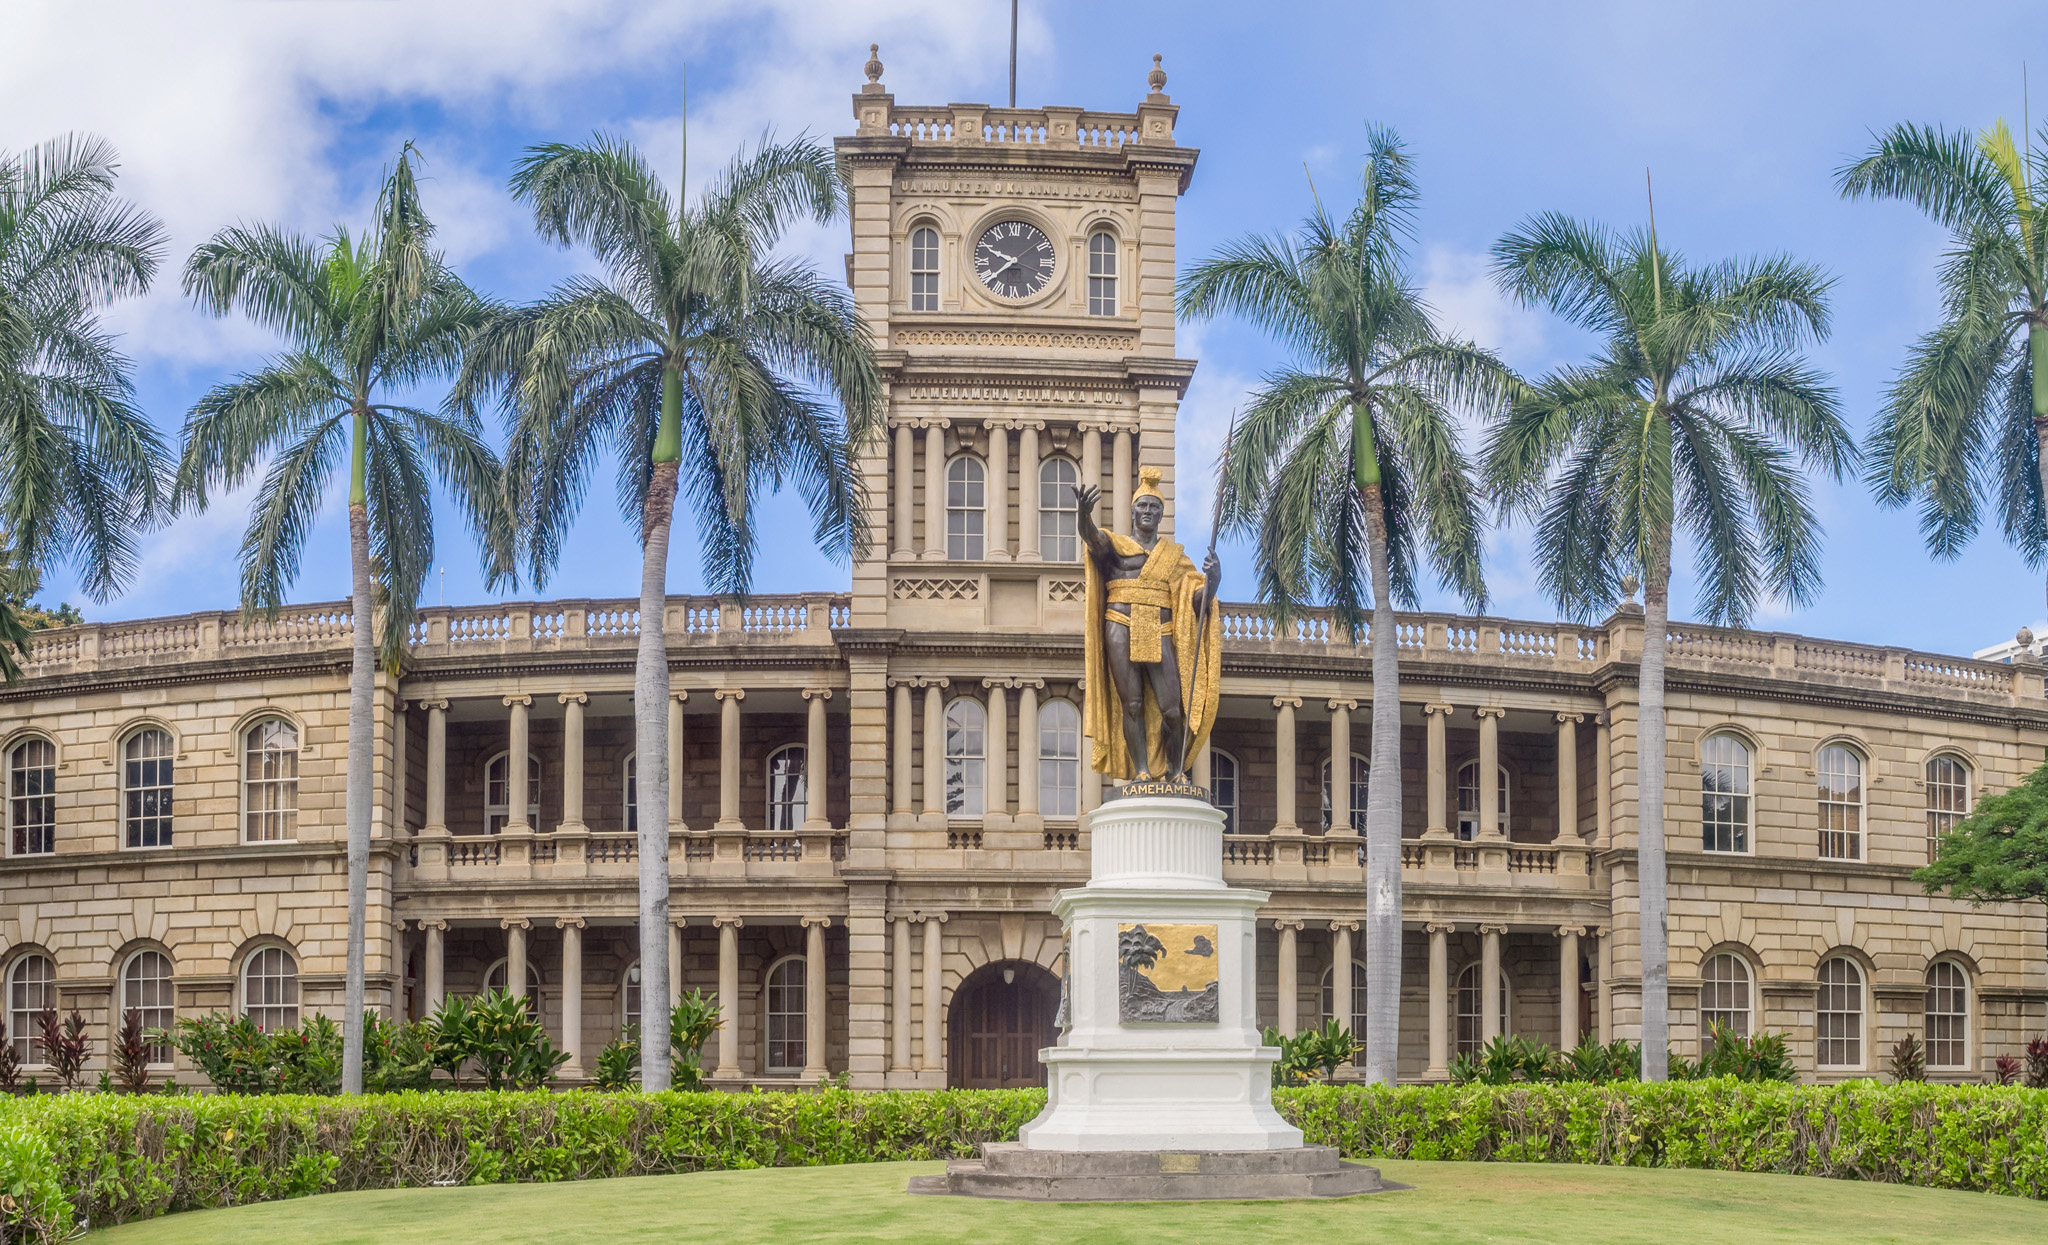 Statue of King Kamehameha in front of Iolani Palace Honolulu Top 10 - photo 6